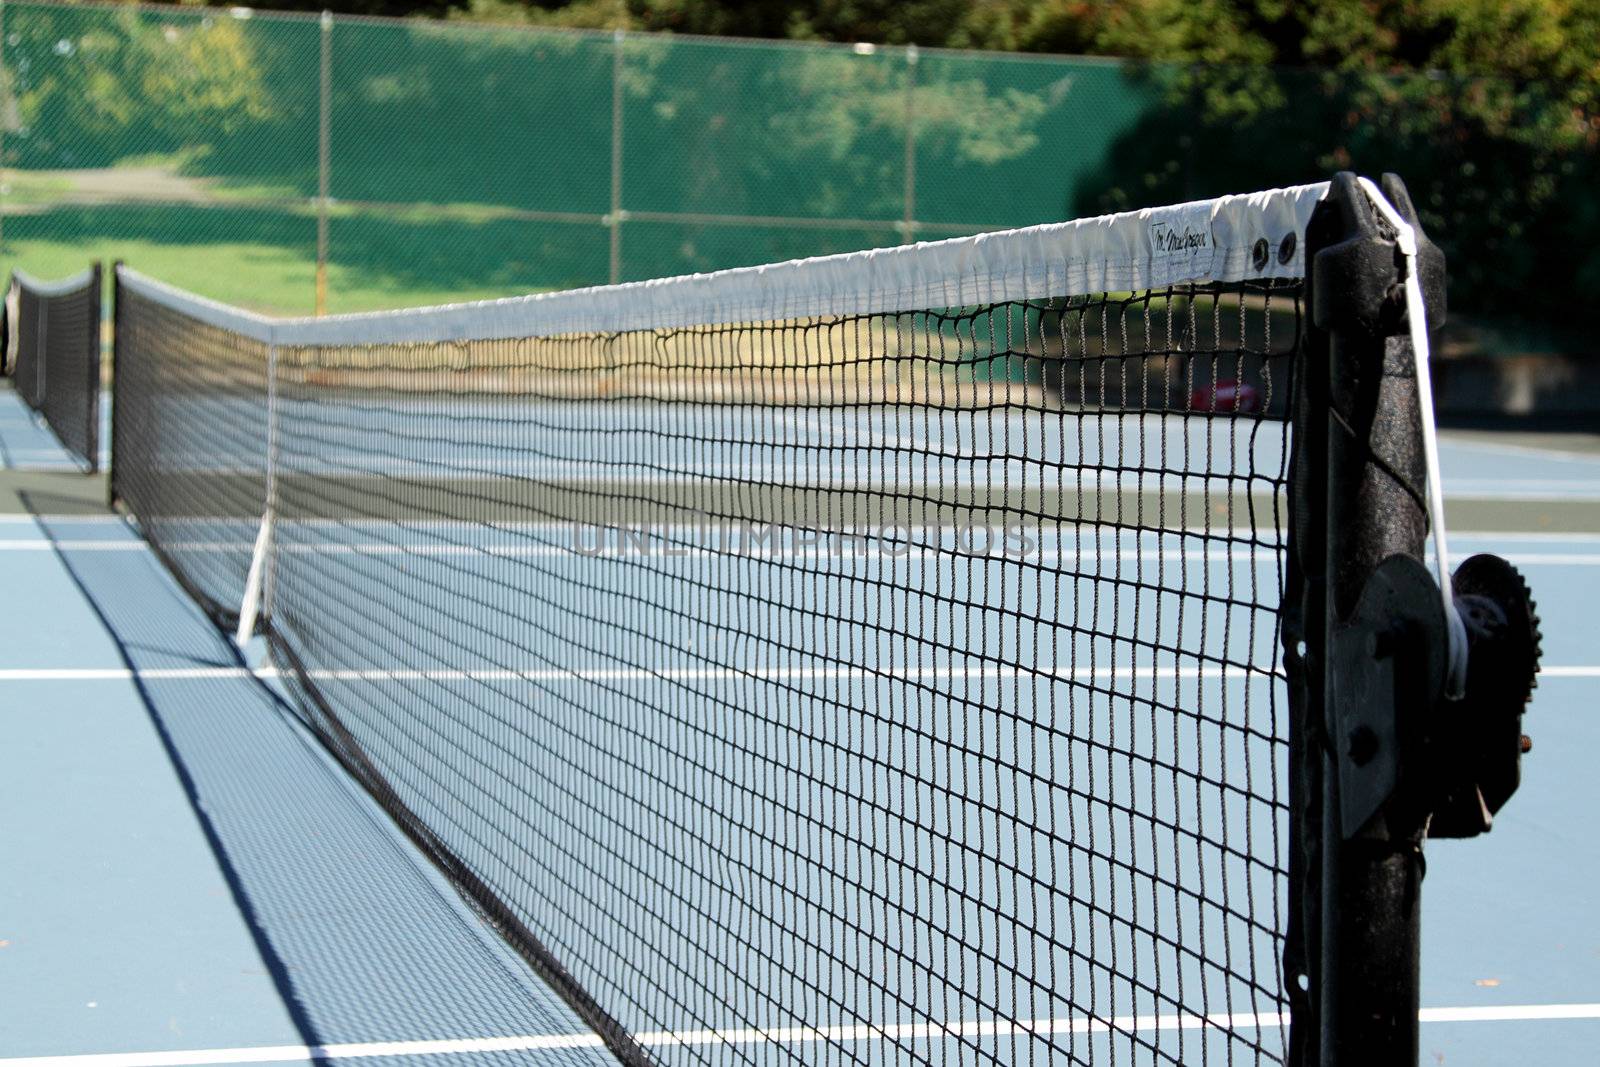 Tennis net on tennis court on a sunny day